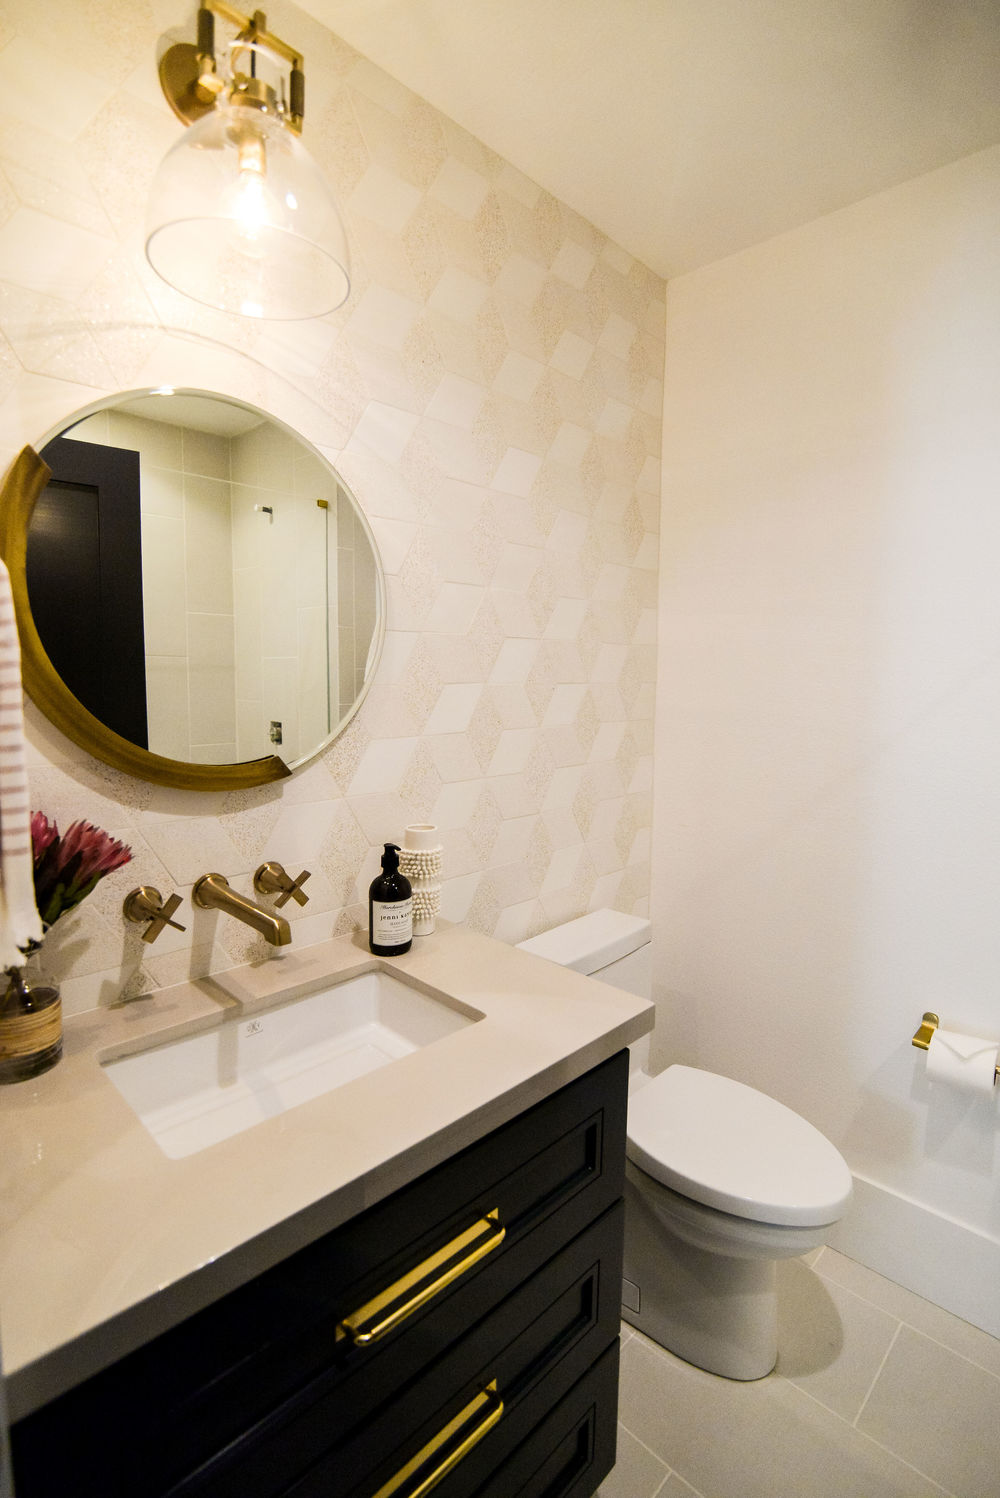 Guest bathroom gets a complete makeover with a designer’s touch